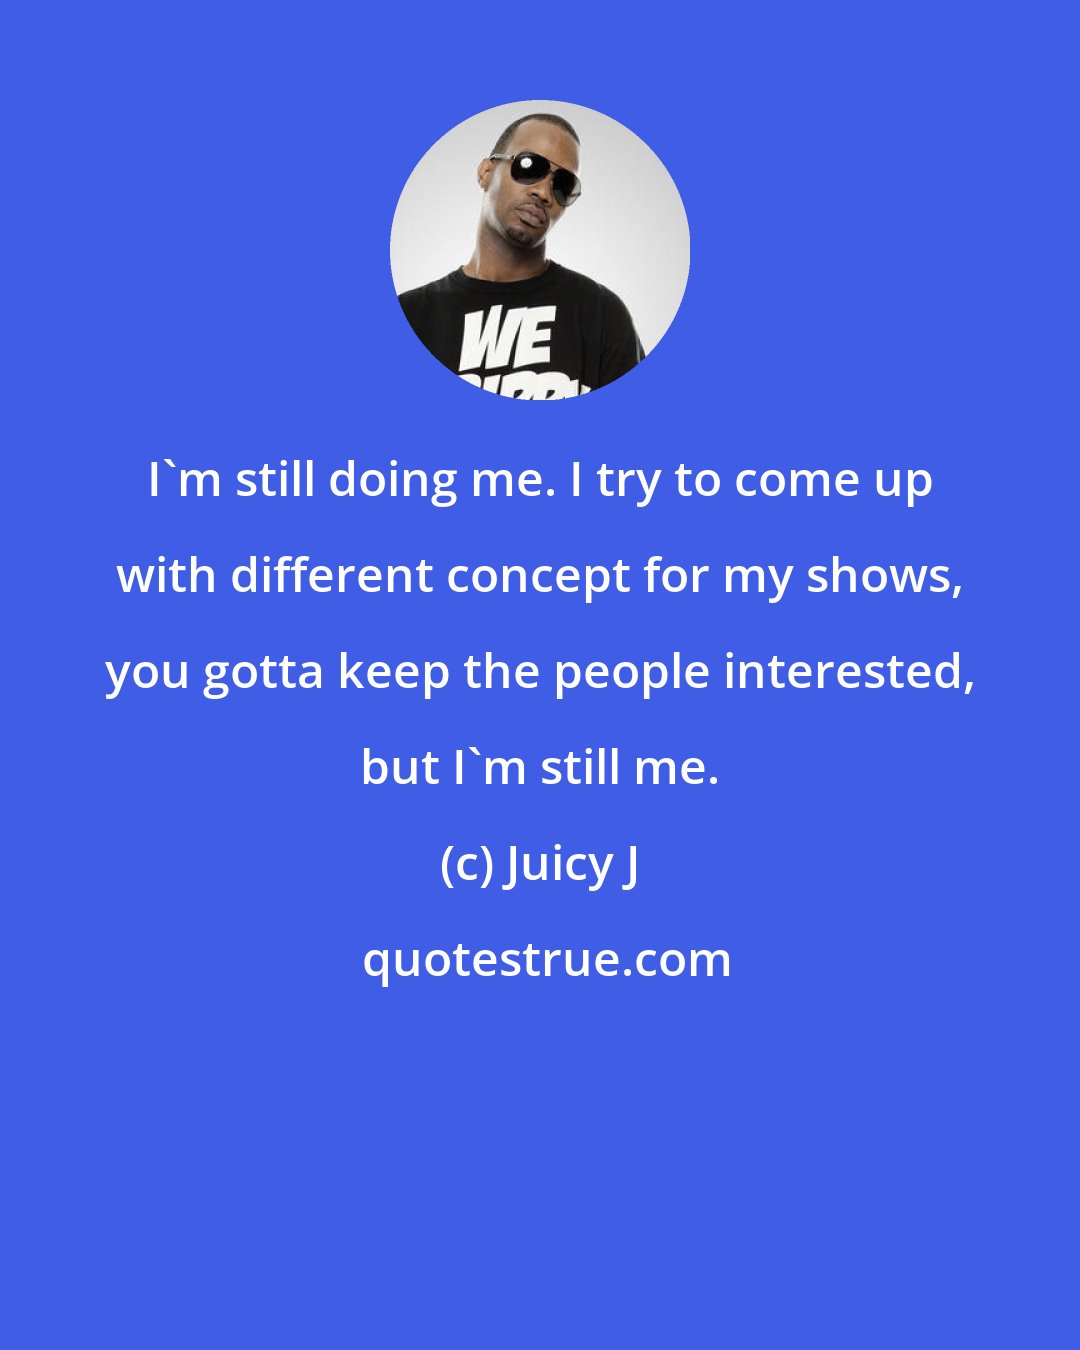 Juicy J: I'm still doing me. I try to come up with different concept for my shows, you gotta keep the people interested, but I'm still me.